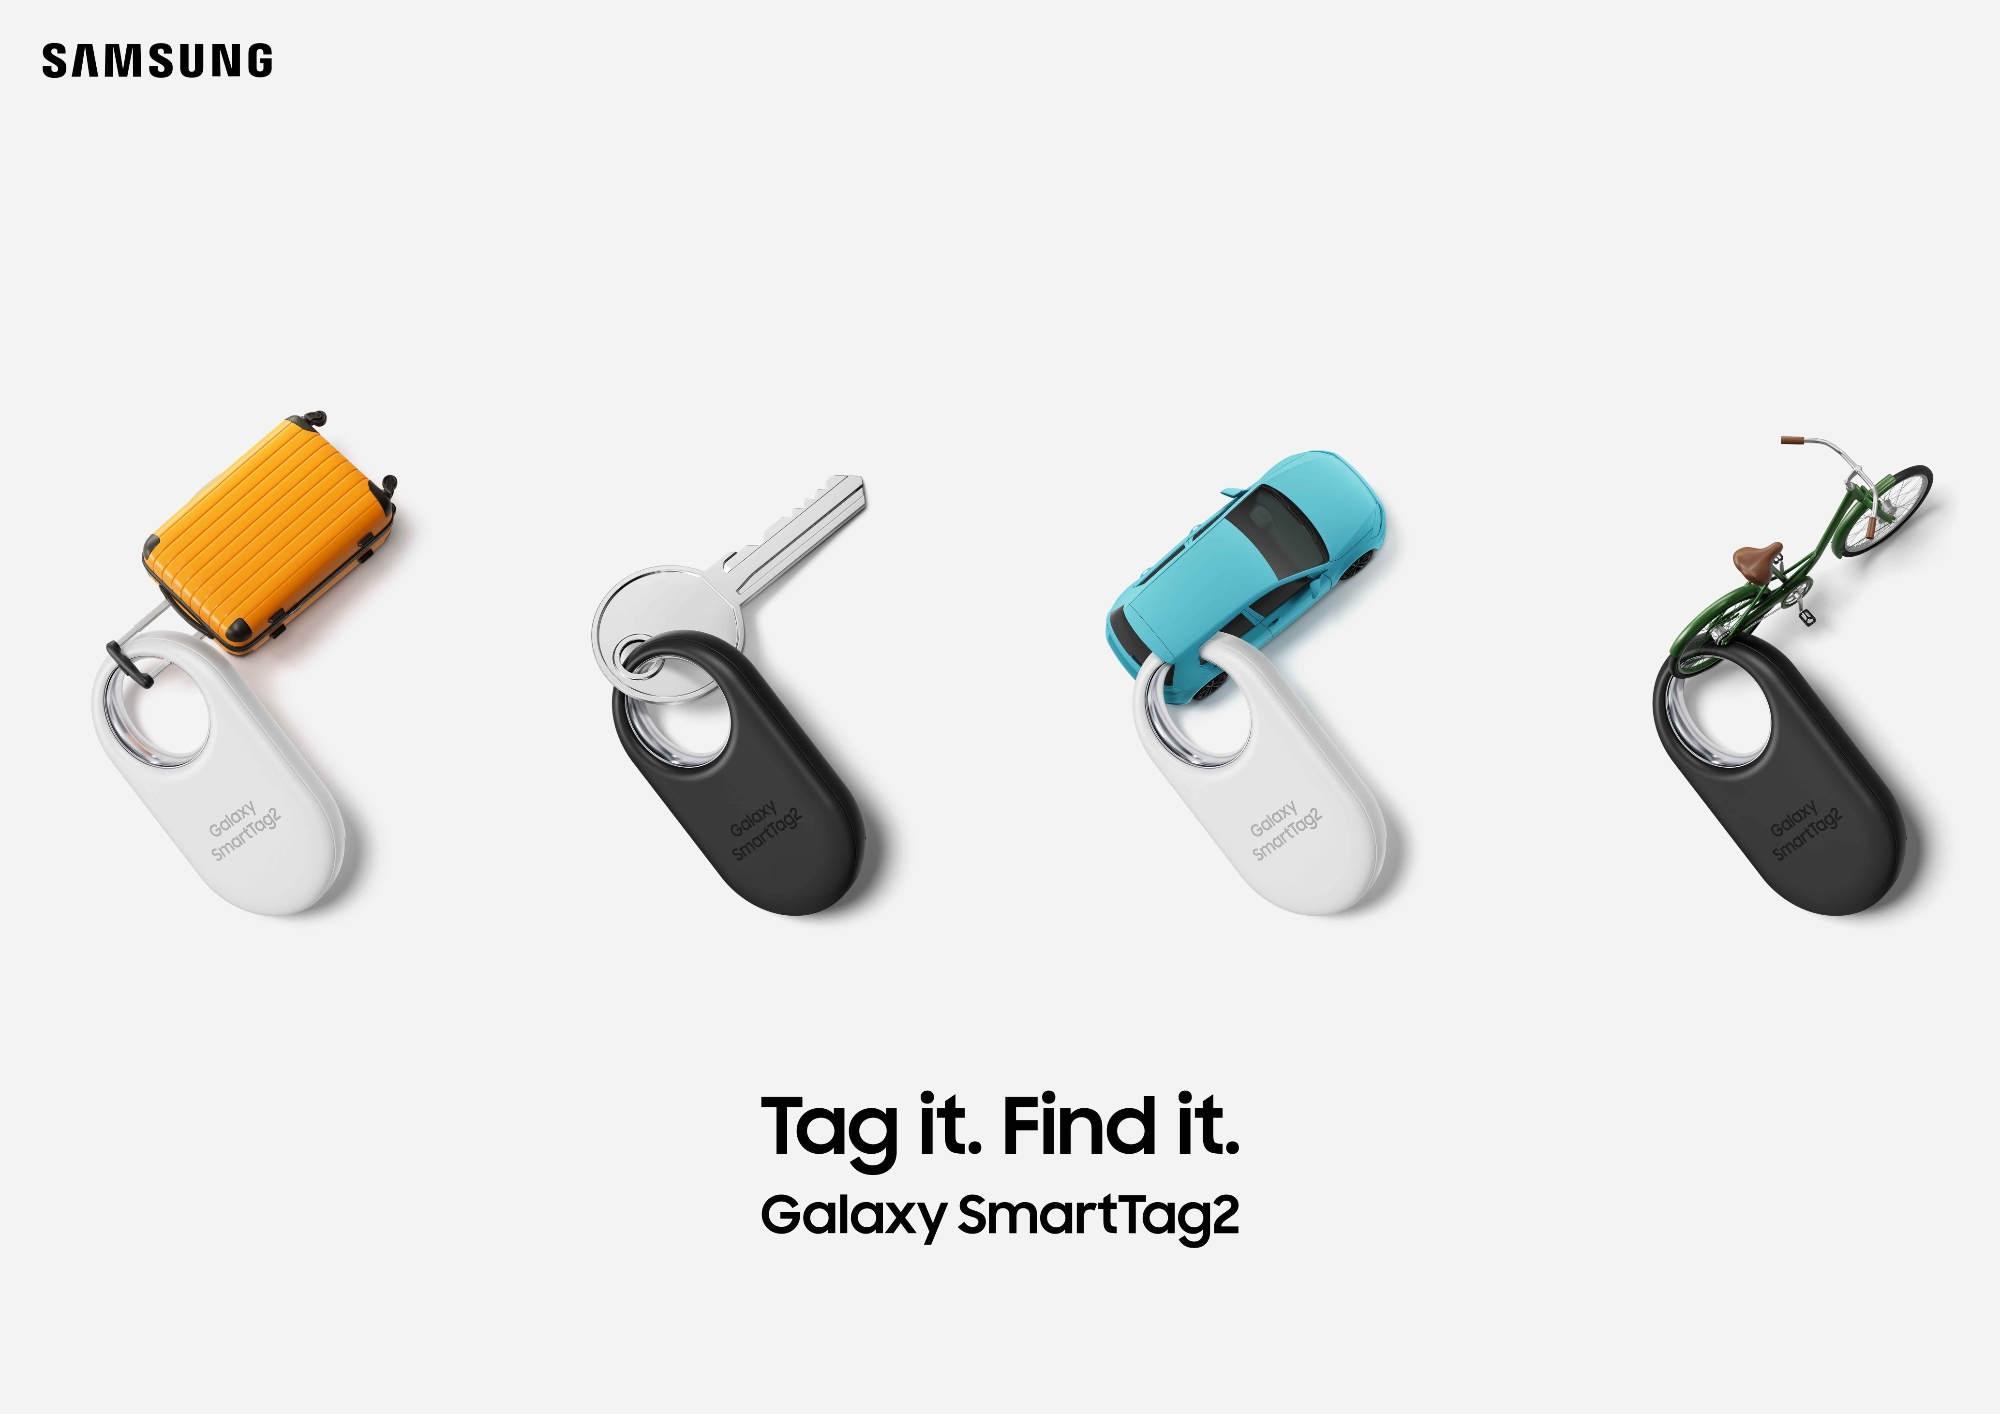 Samsung announced the Galaxy SmartTag 2: an object tracker with IP67 protection, up to 700 days battery life and UWB support for $29